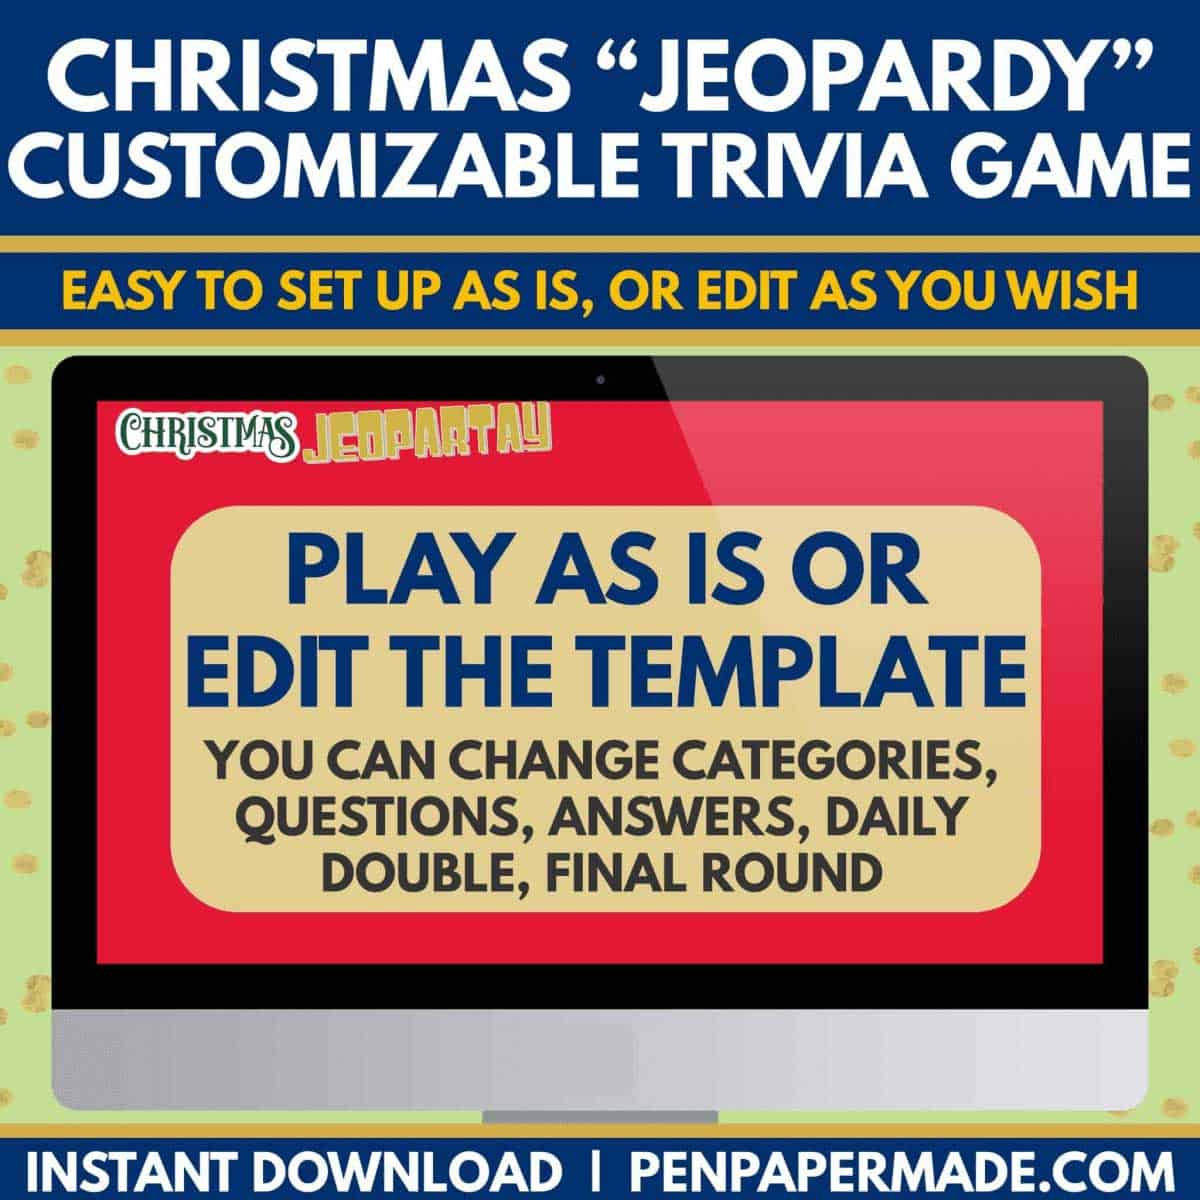 pre-loaded classic christmas jeopardy questions to play as is or edit template with own questions.